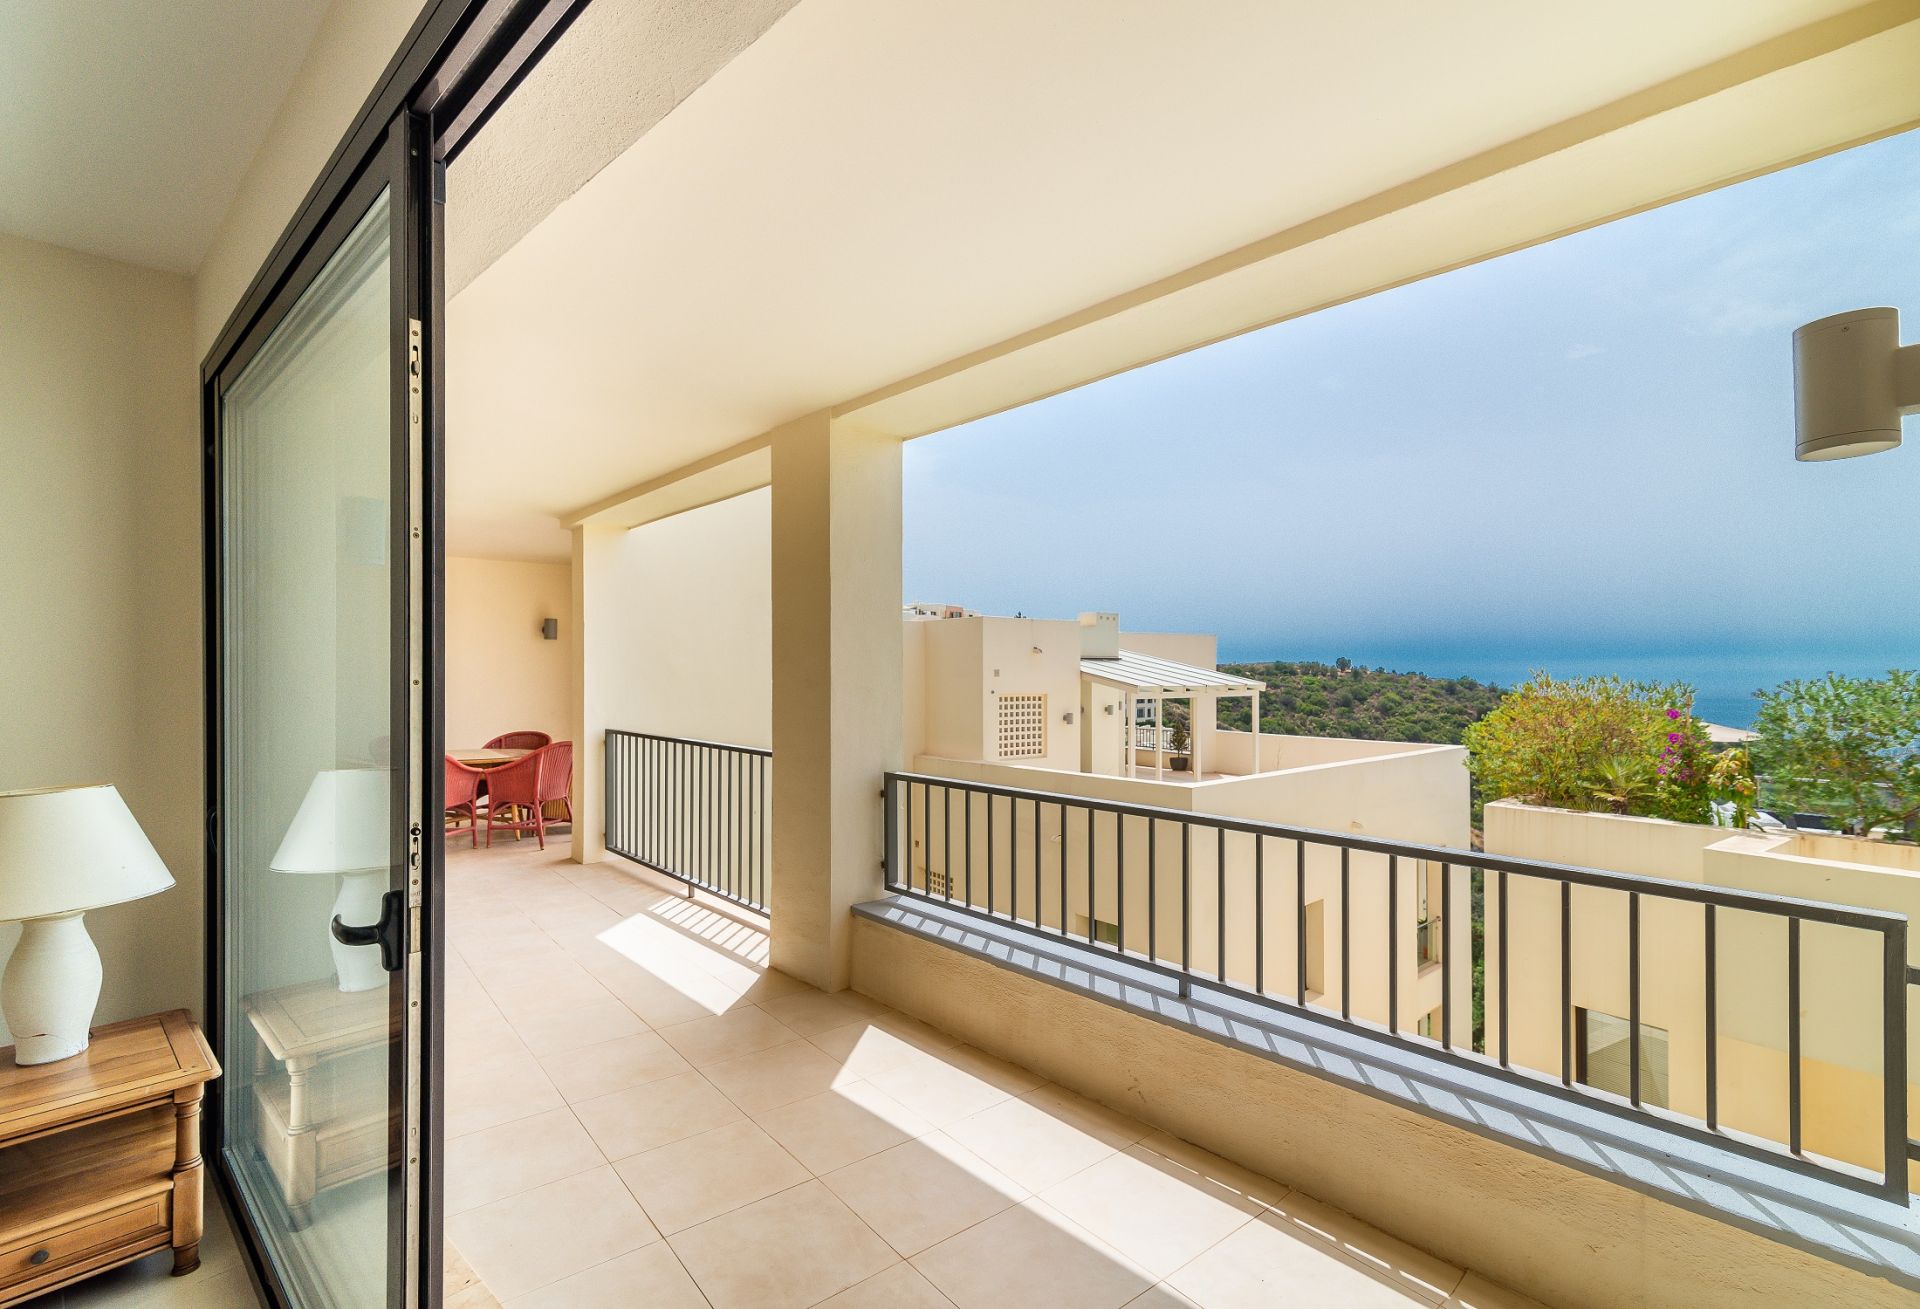 Impeccable apartment with stunning views | Engel & Völkers Marbella